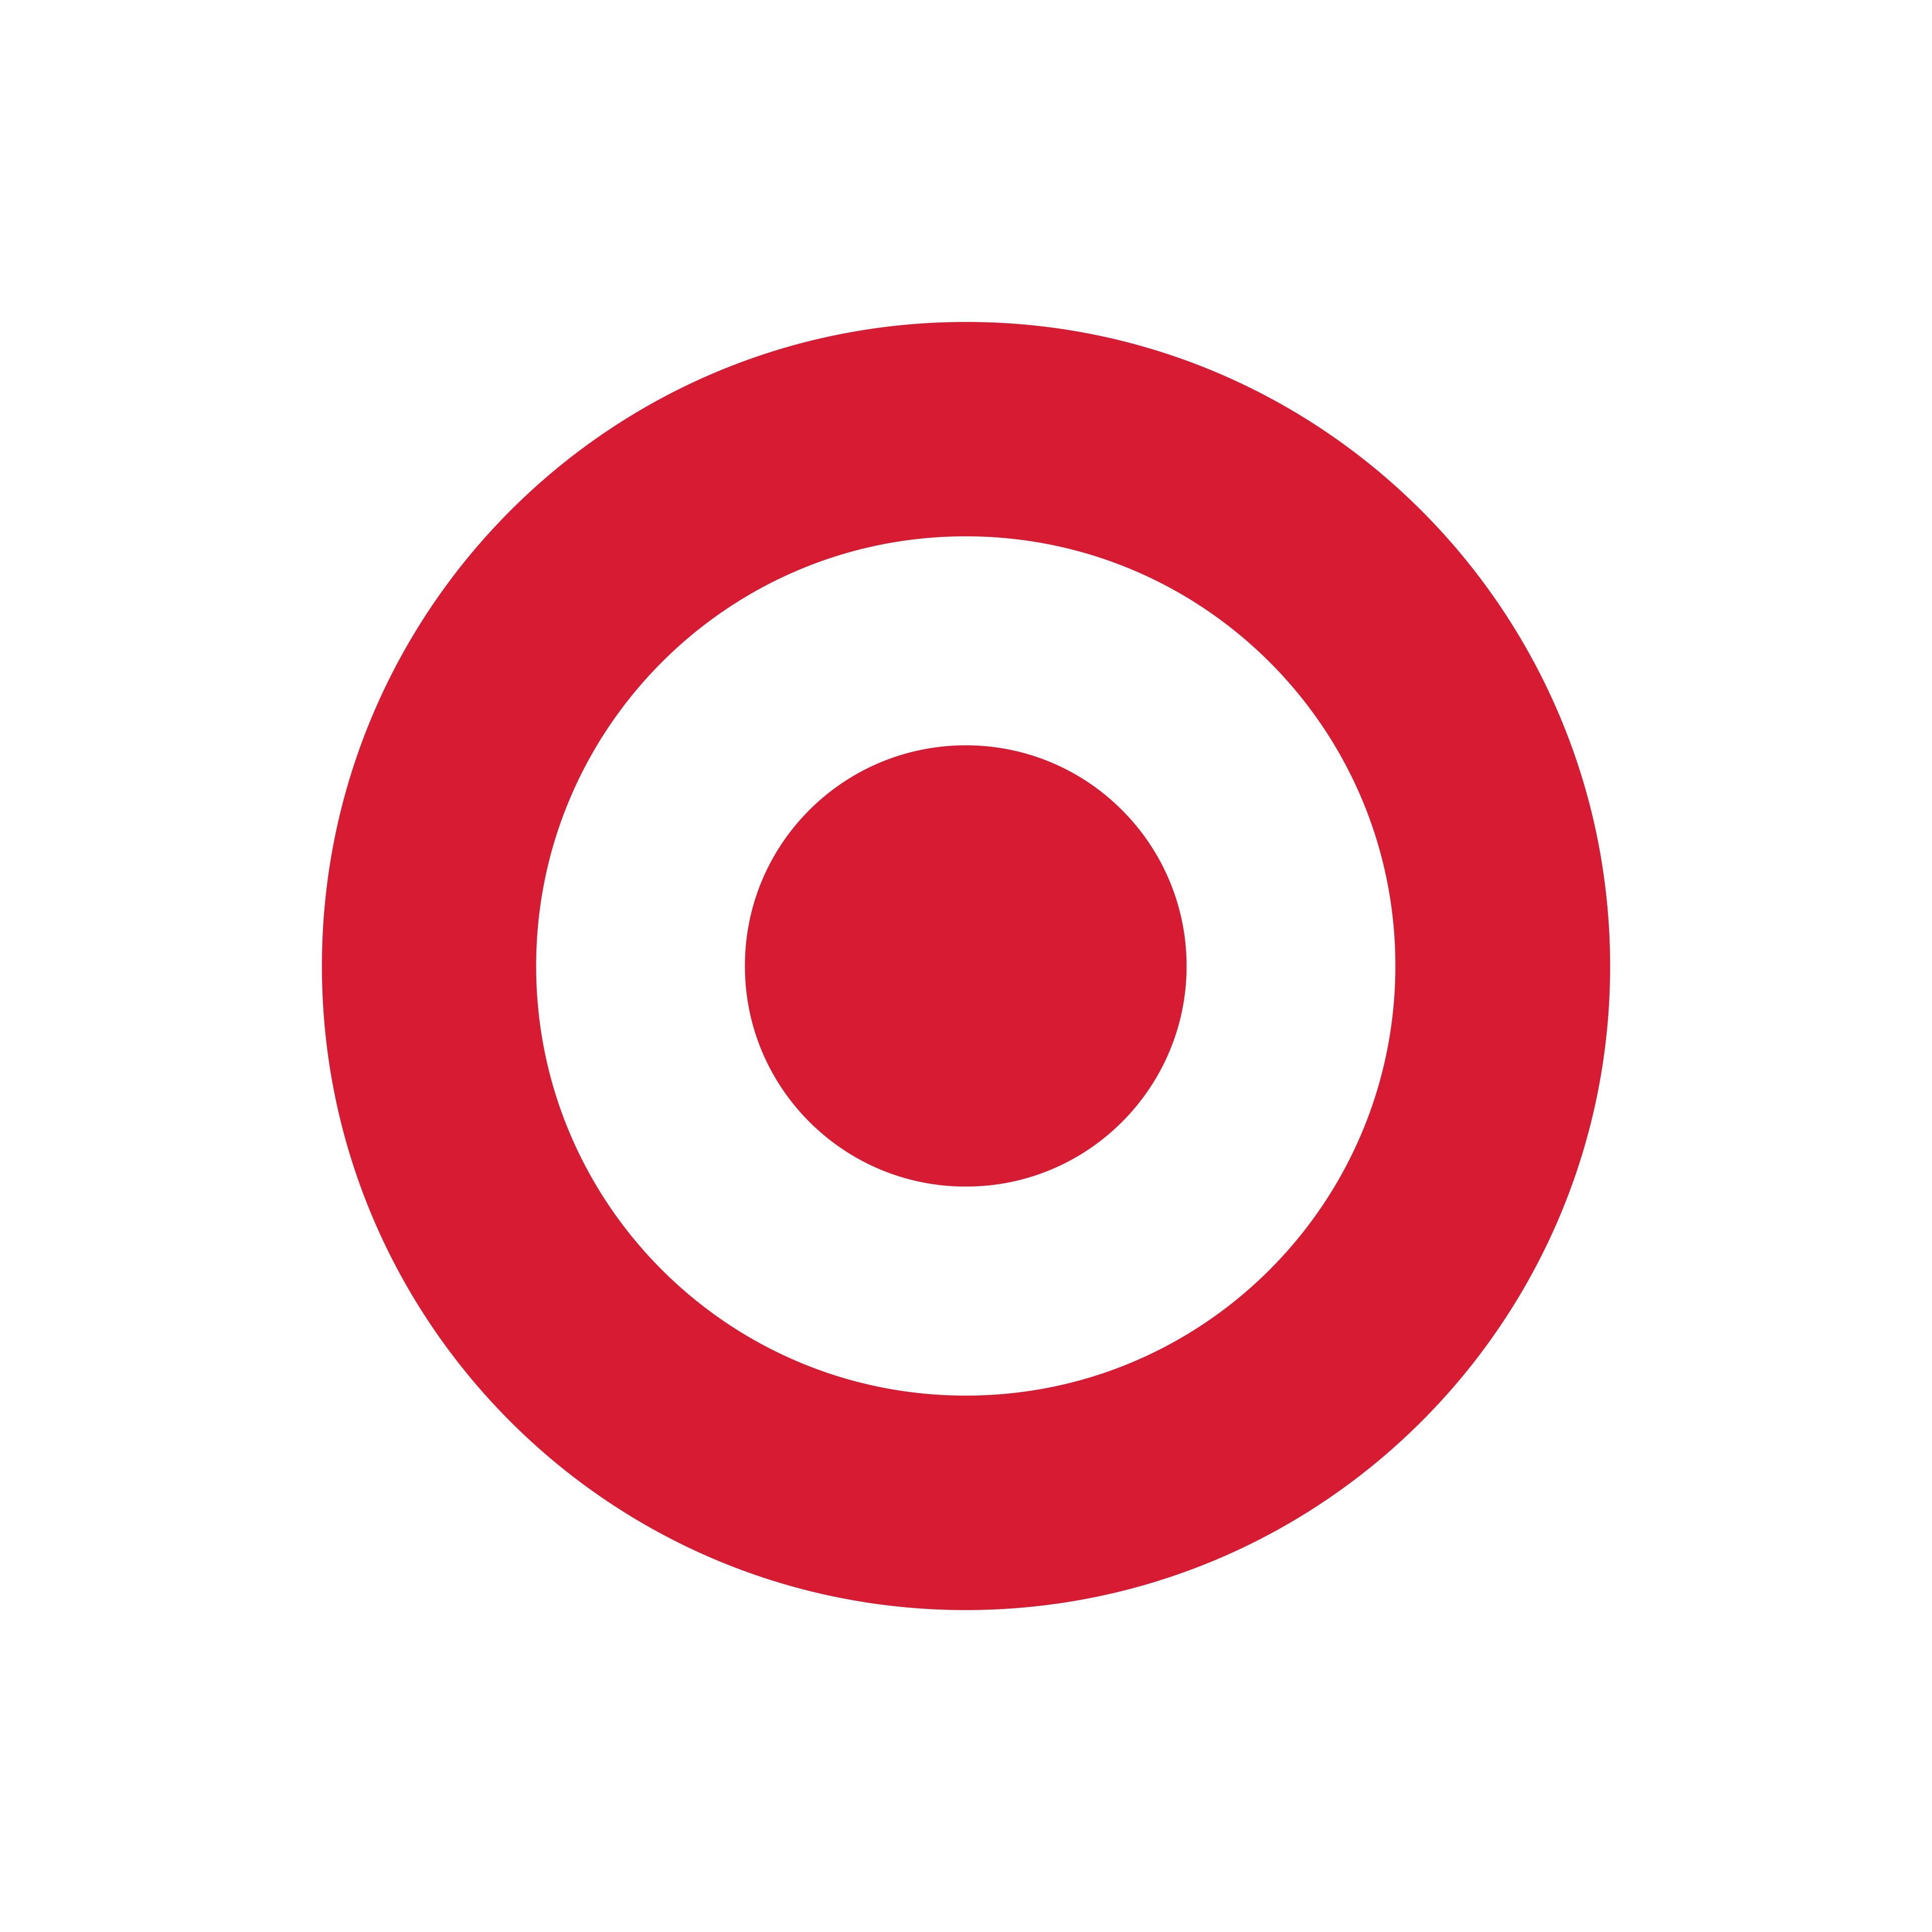 Target the retailer - logo - this link takes you to the Impossible Foods landing page promoting Target as a retailer to purchase Impossible products from